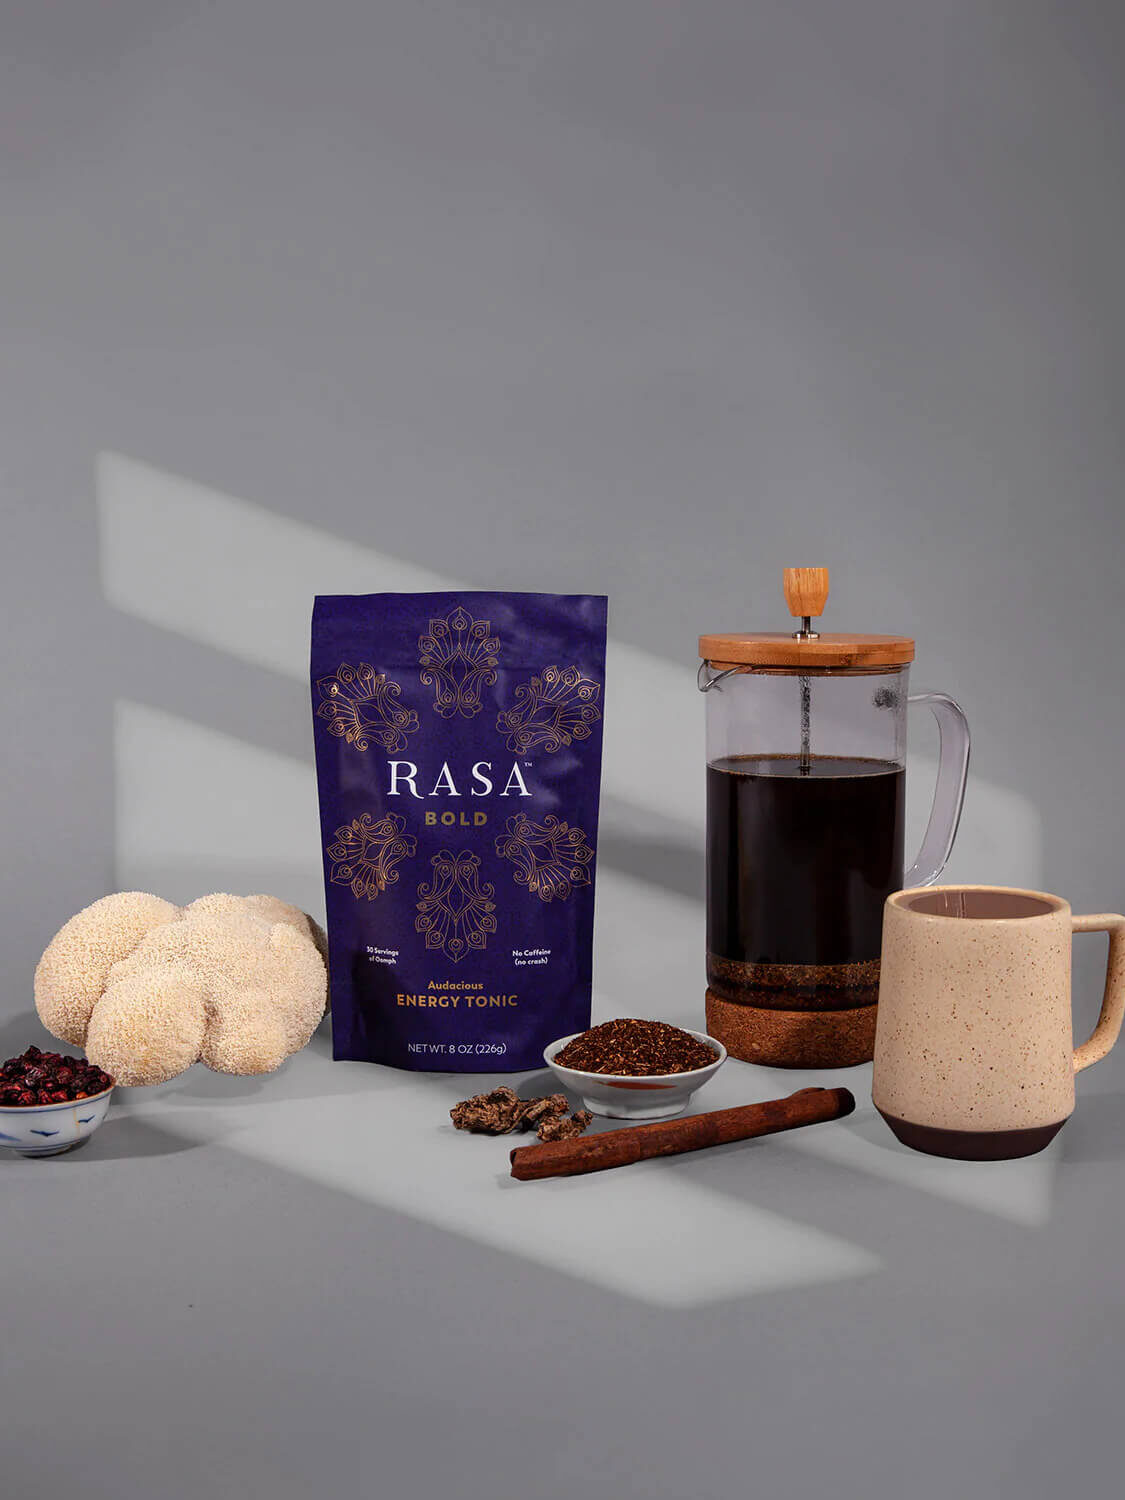 A pack of Rasa coffee alternative with a french press next to it, filled with the brewed blend.